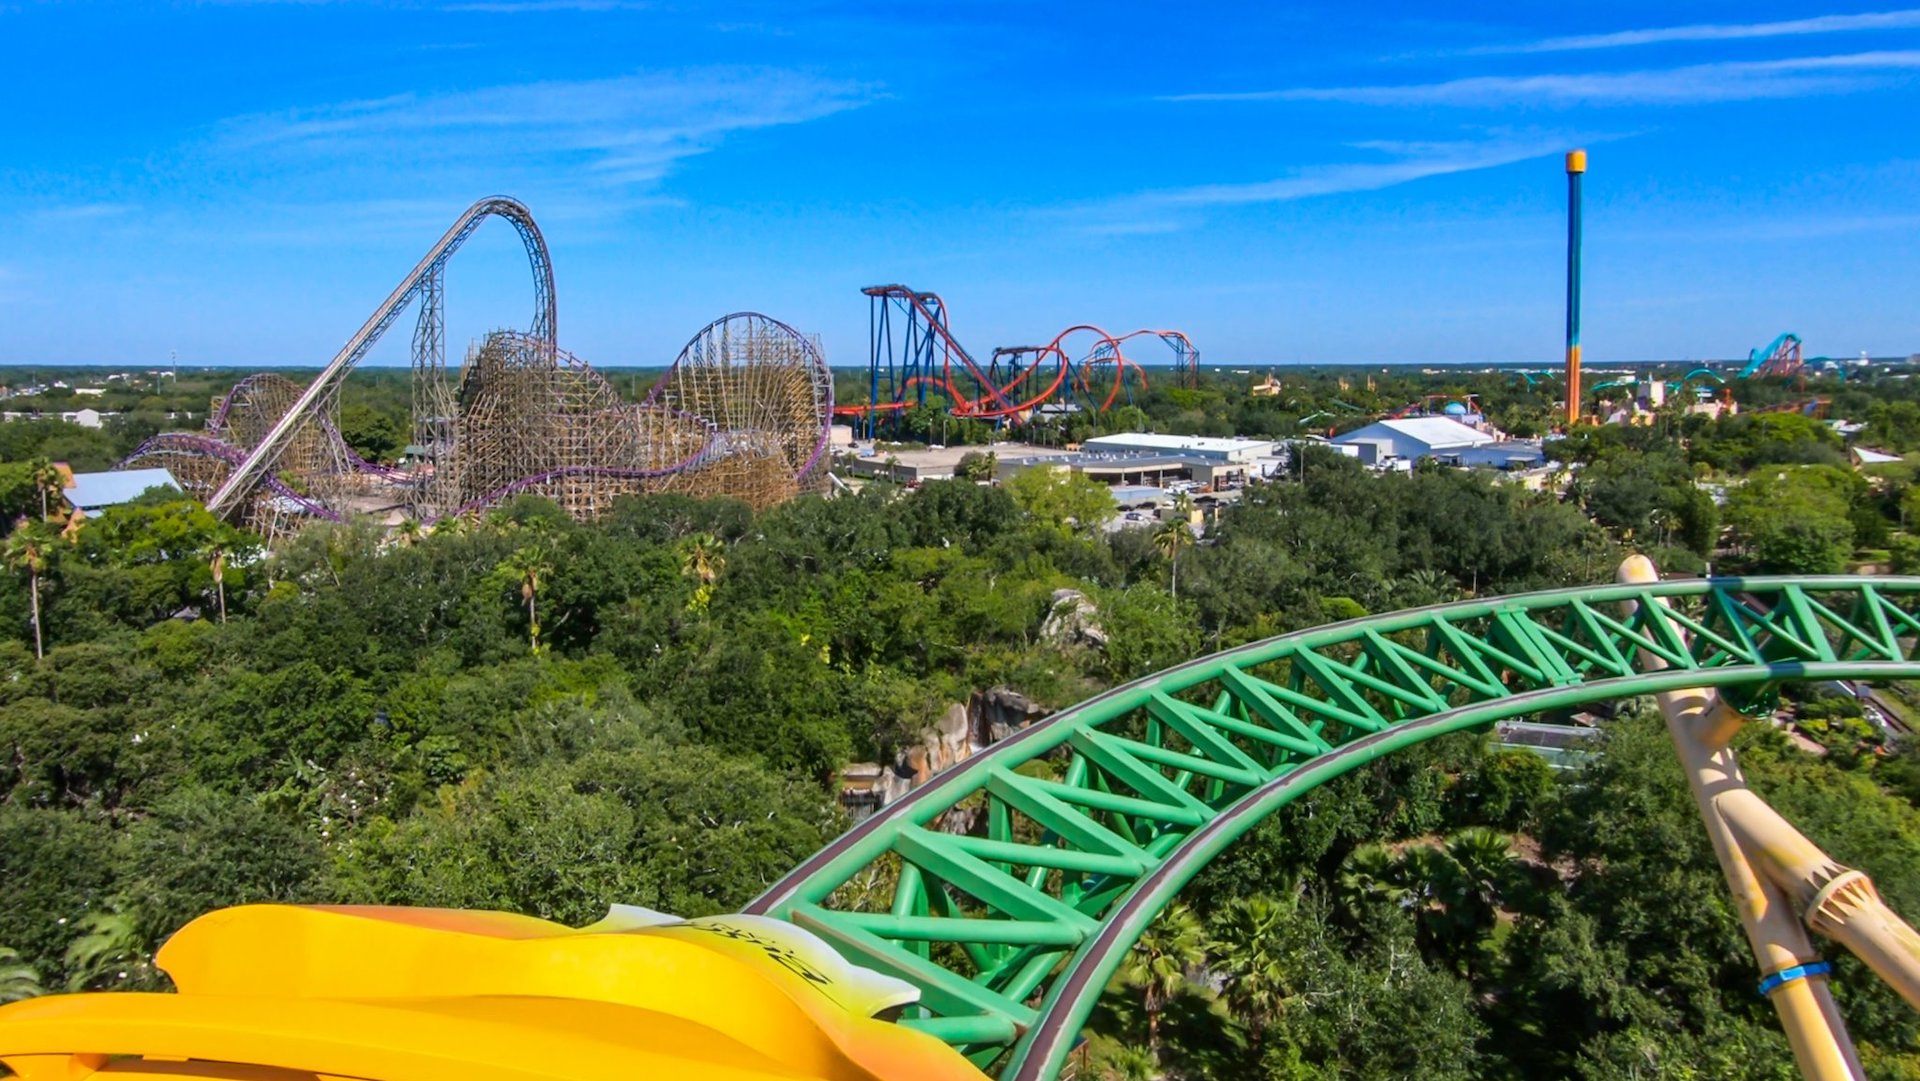 Busch Gardens reopens June 11. What to expect when you visit That's